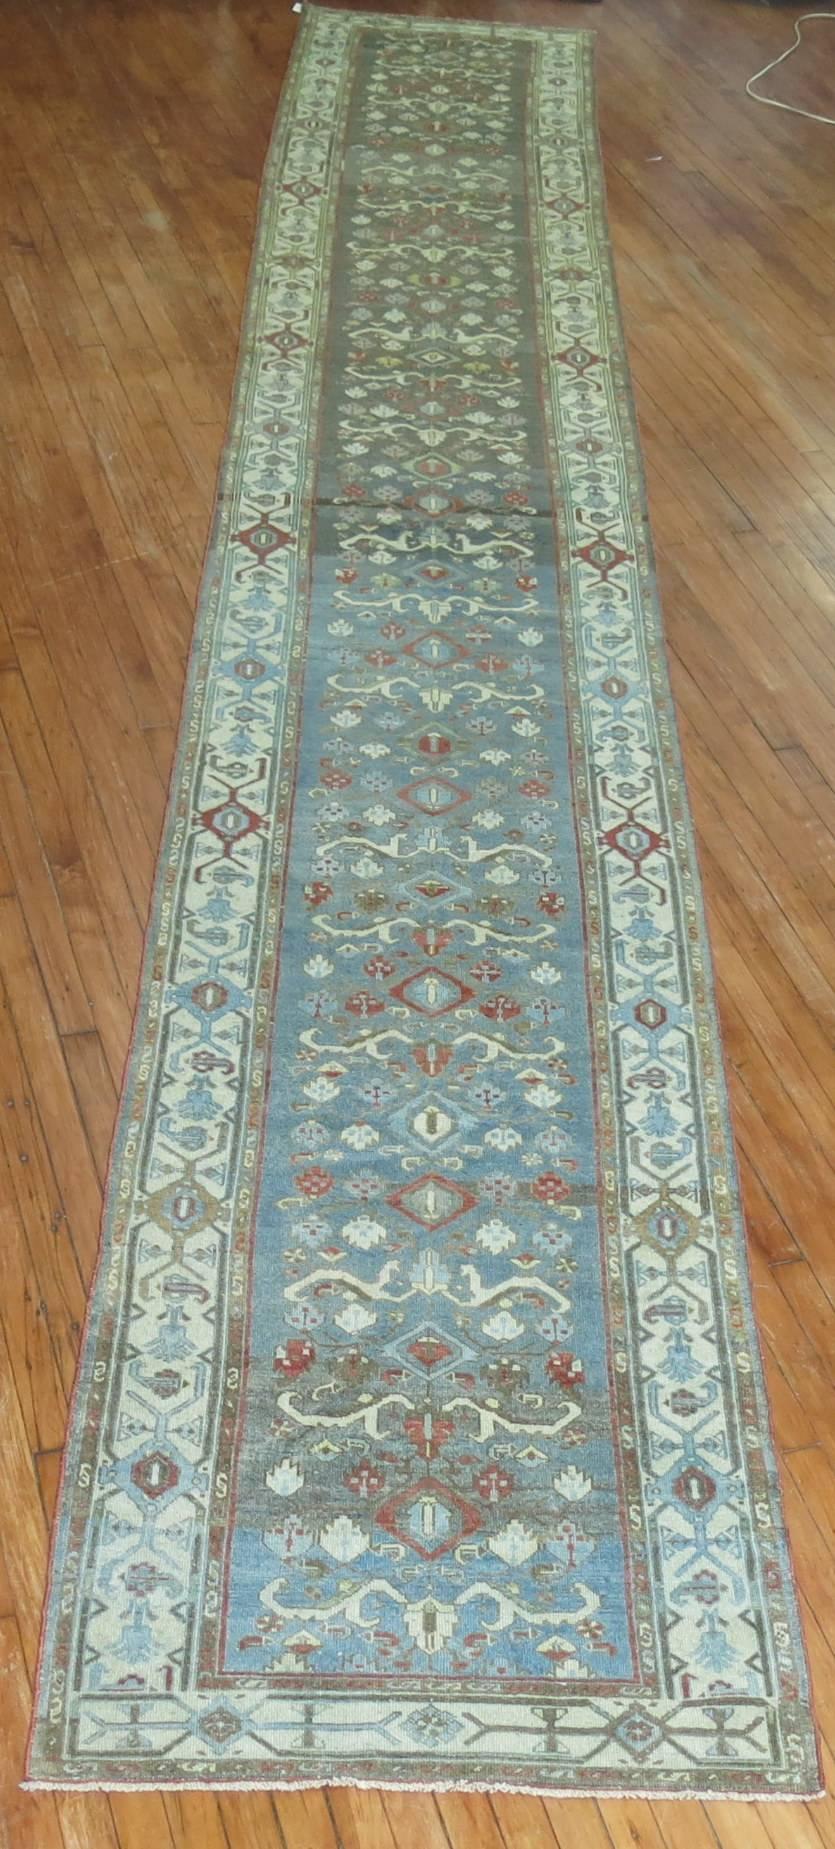 Early 20th century abrashed Persian Malayer runner. Accents in icy blue, green, brown and peppermint red.

Measures: 3' x 19'4''.